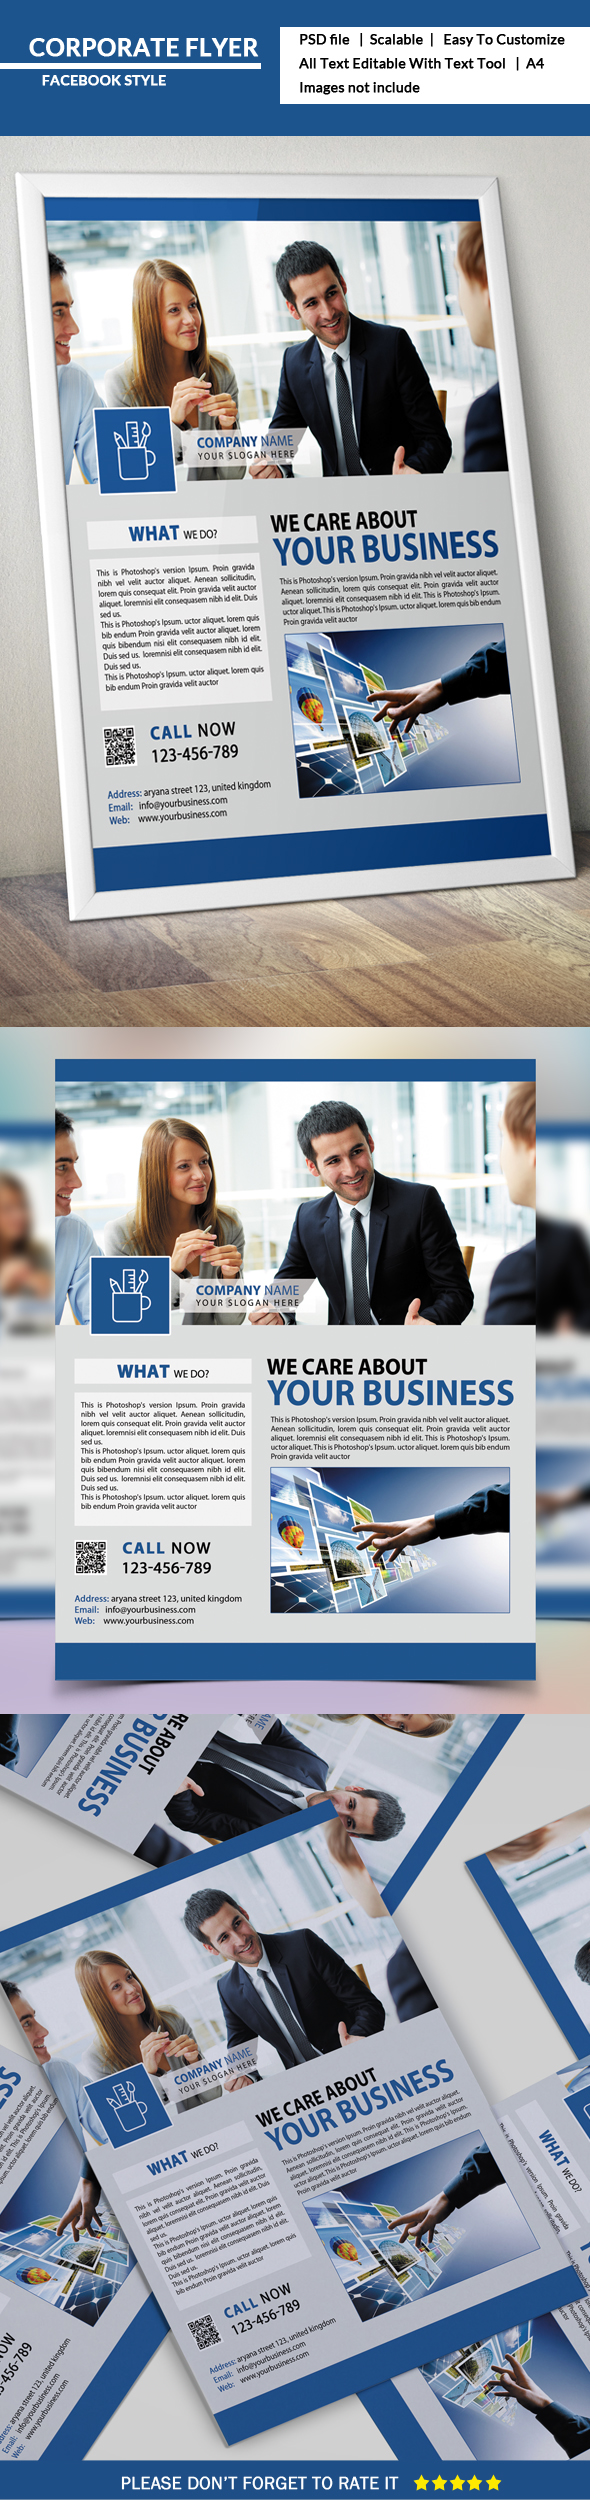 advertisement ai blue business business flyer Business solution Consulting corporate flyer digital editable Facebook Flyer facekbook flyer graphic marketing  